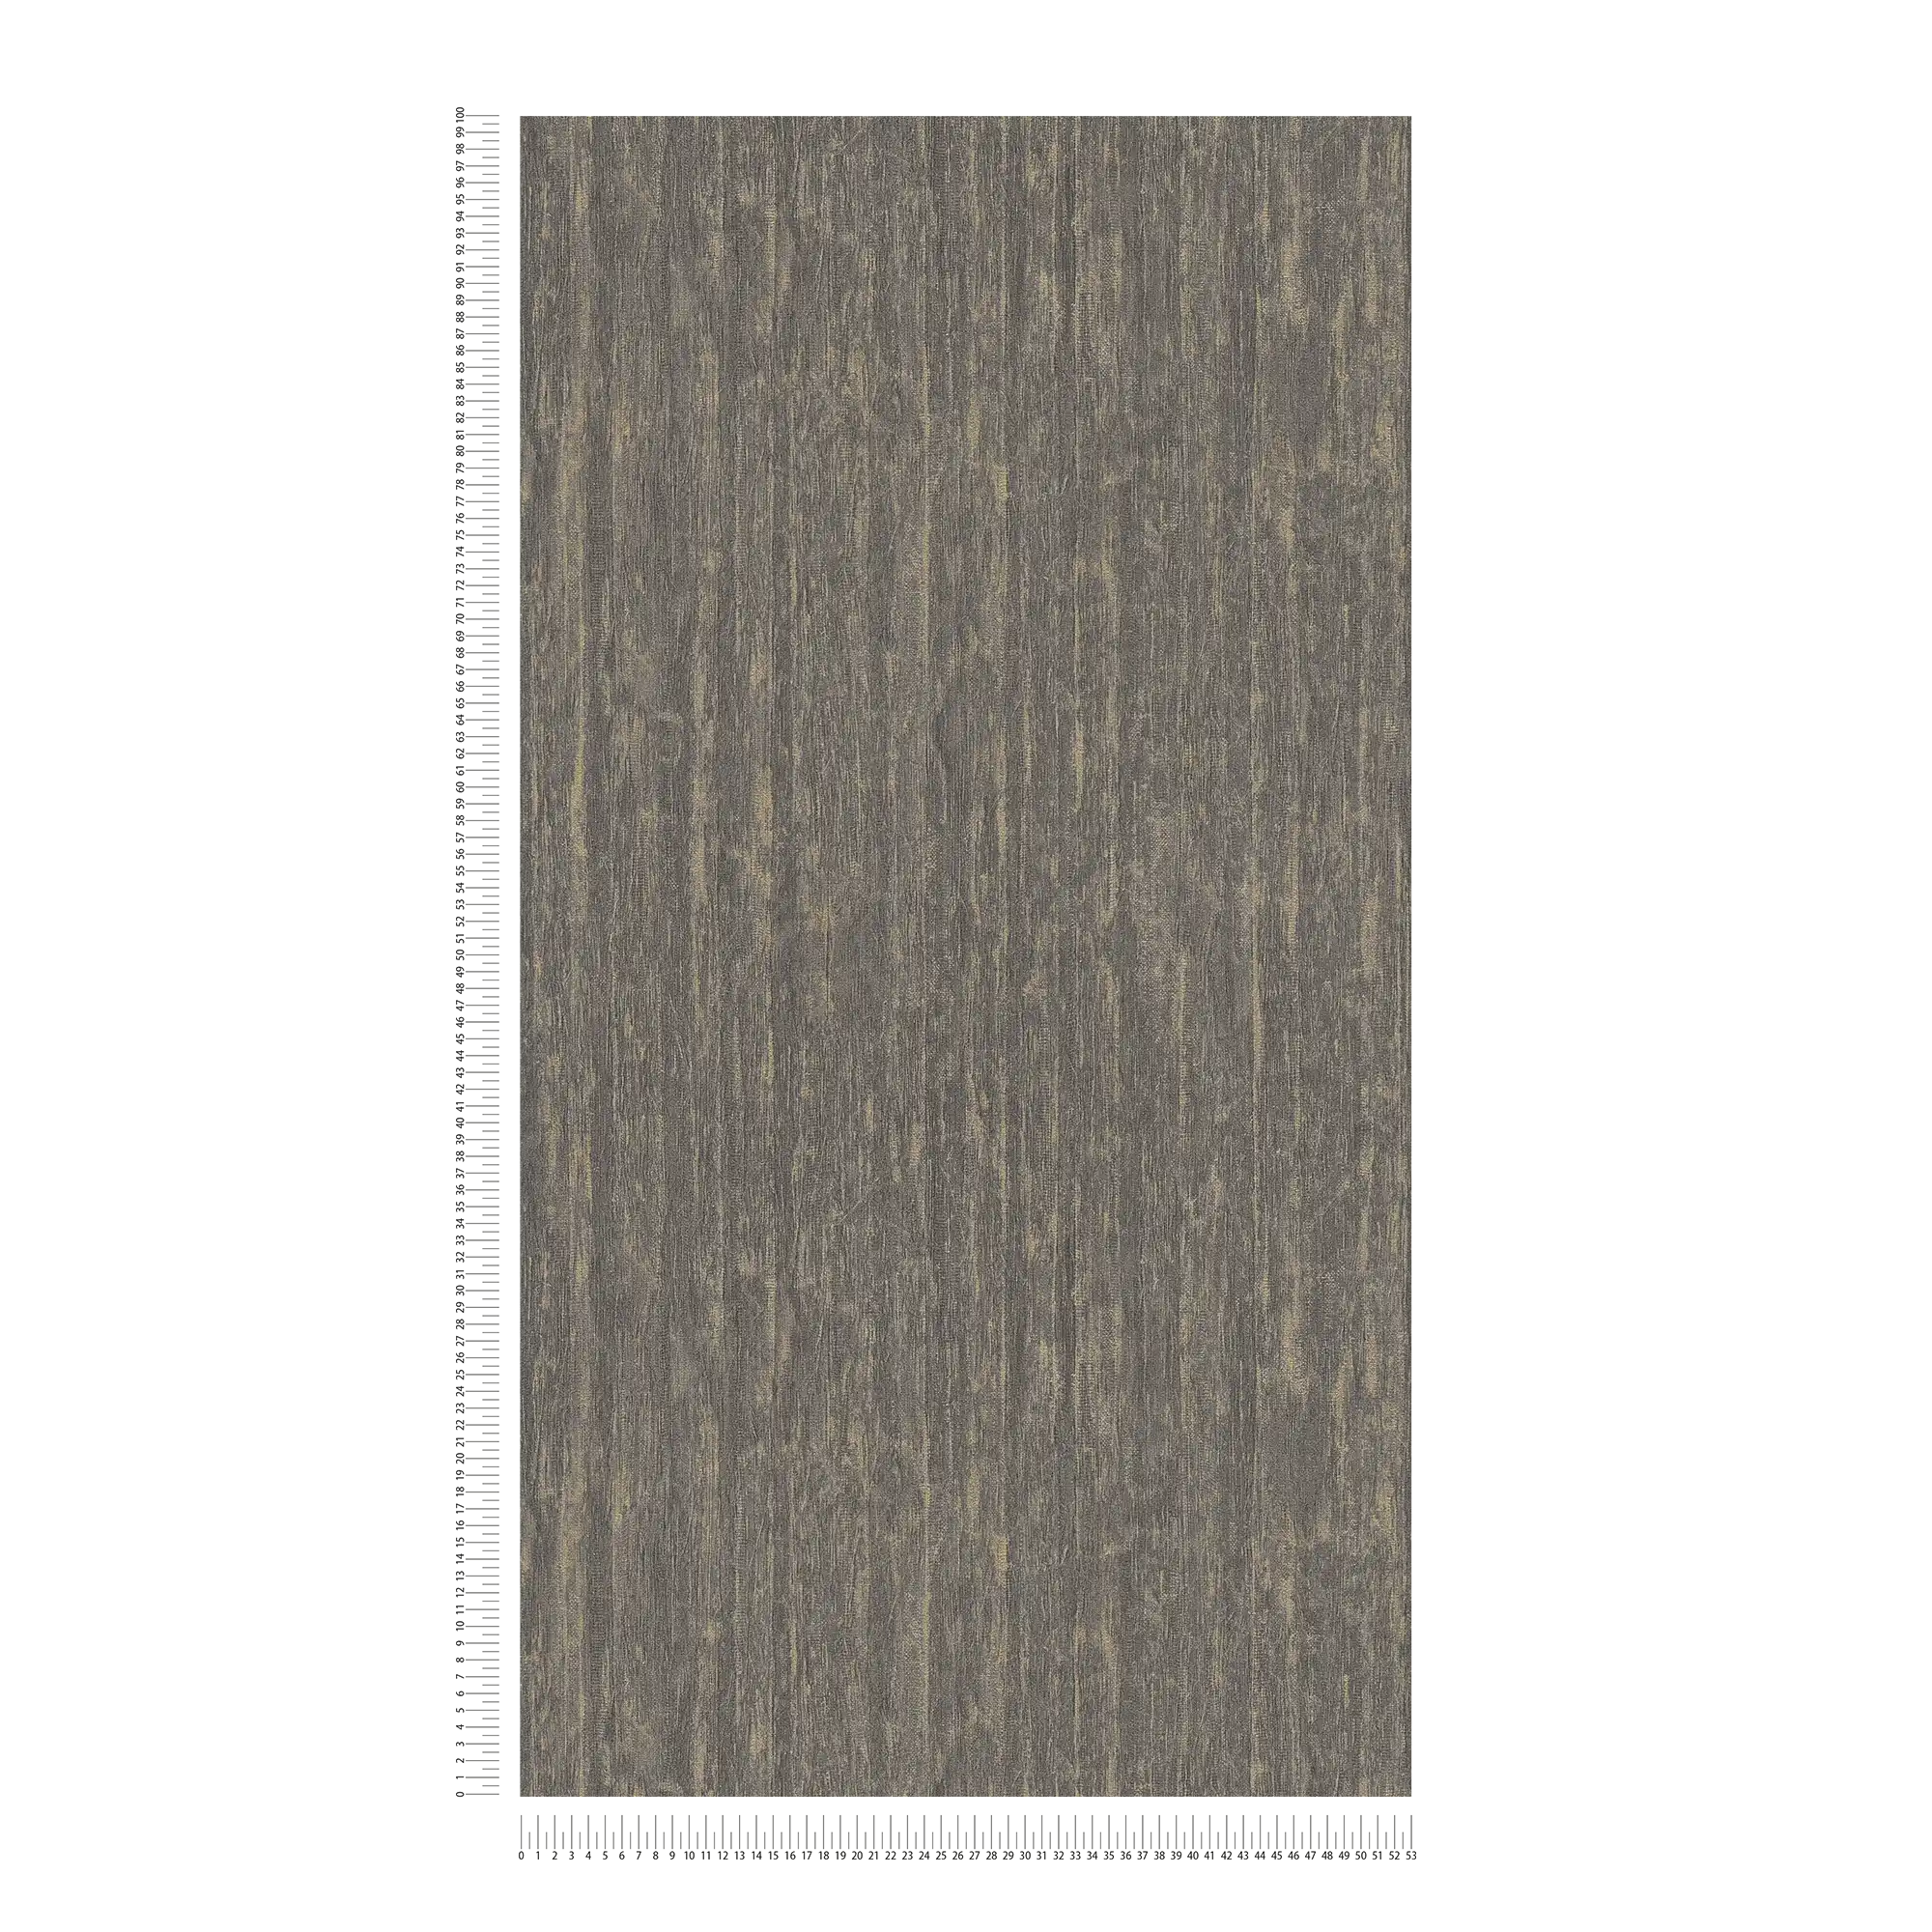             Non-woven wallpaper in plaster look with golden accents - brown, grey, gold
        